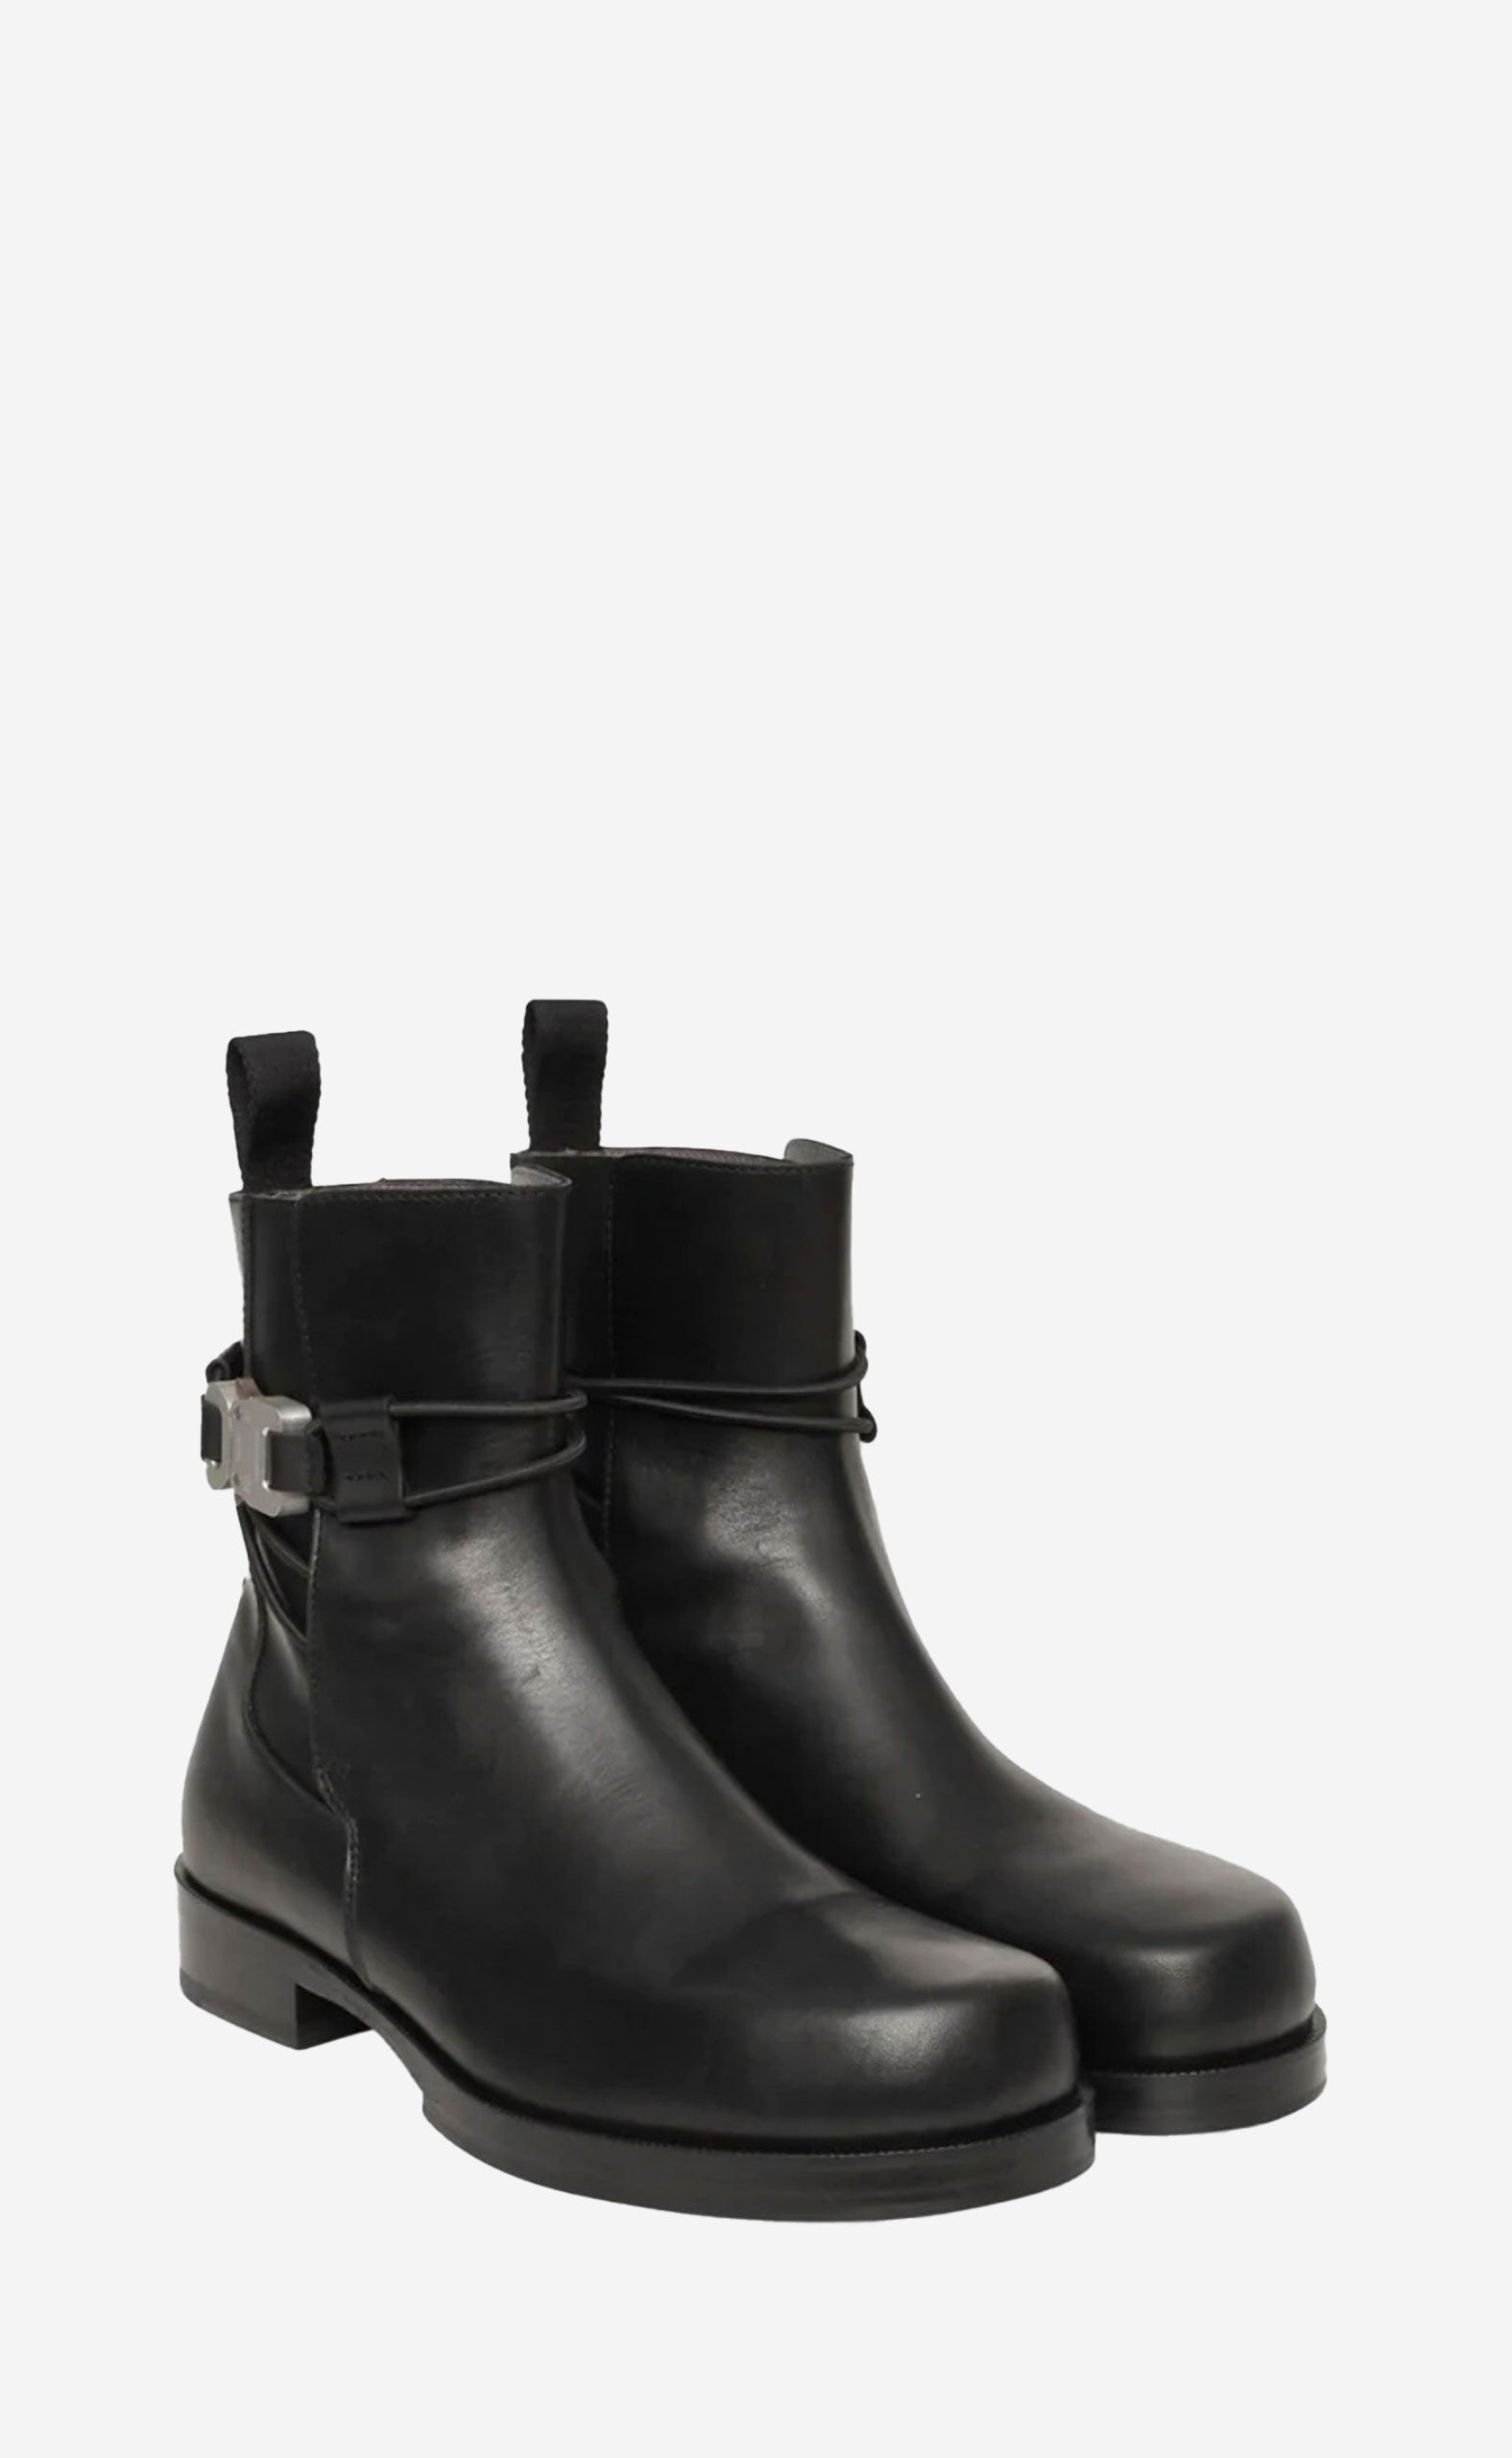 BLACK LOW BUCKLE BOOT WITH LEATHER SOLE